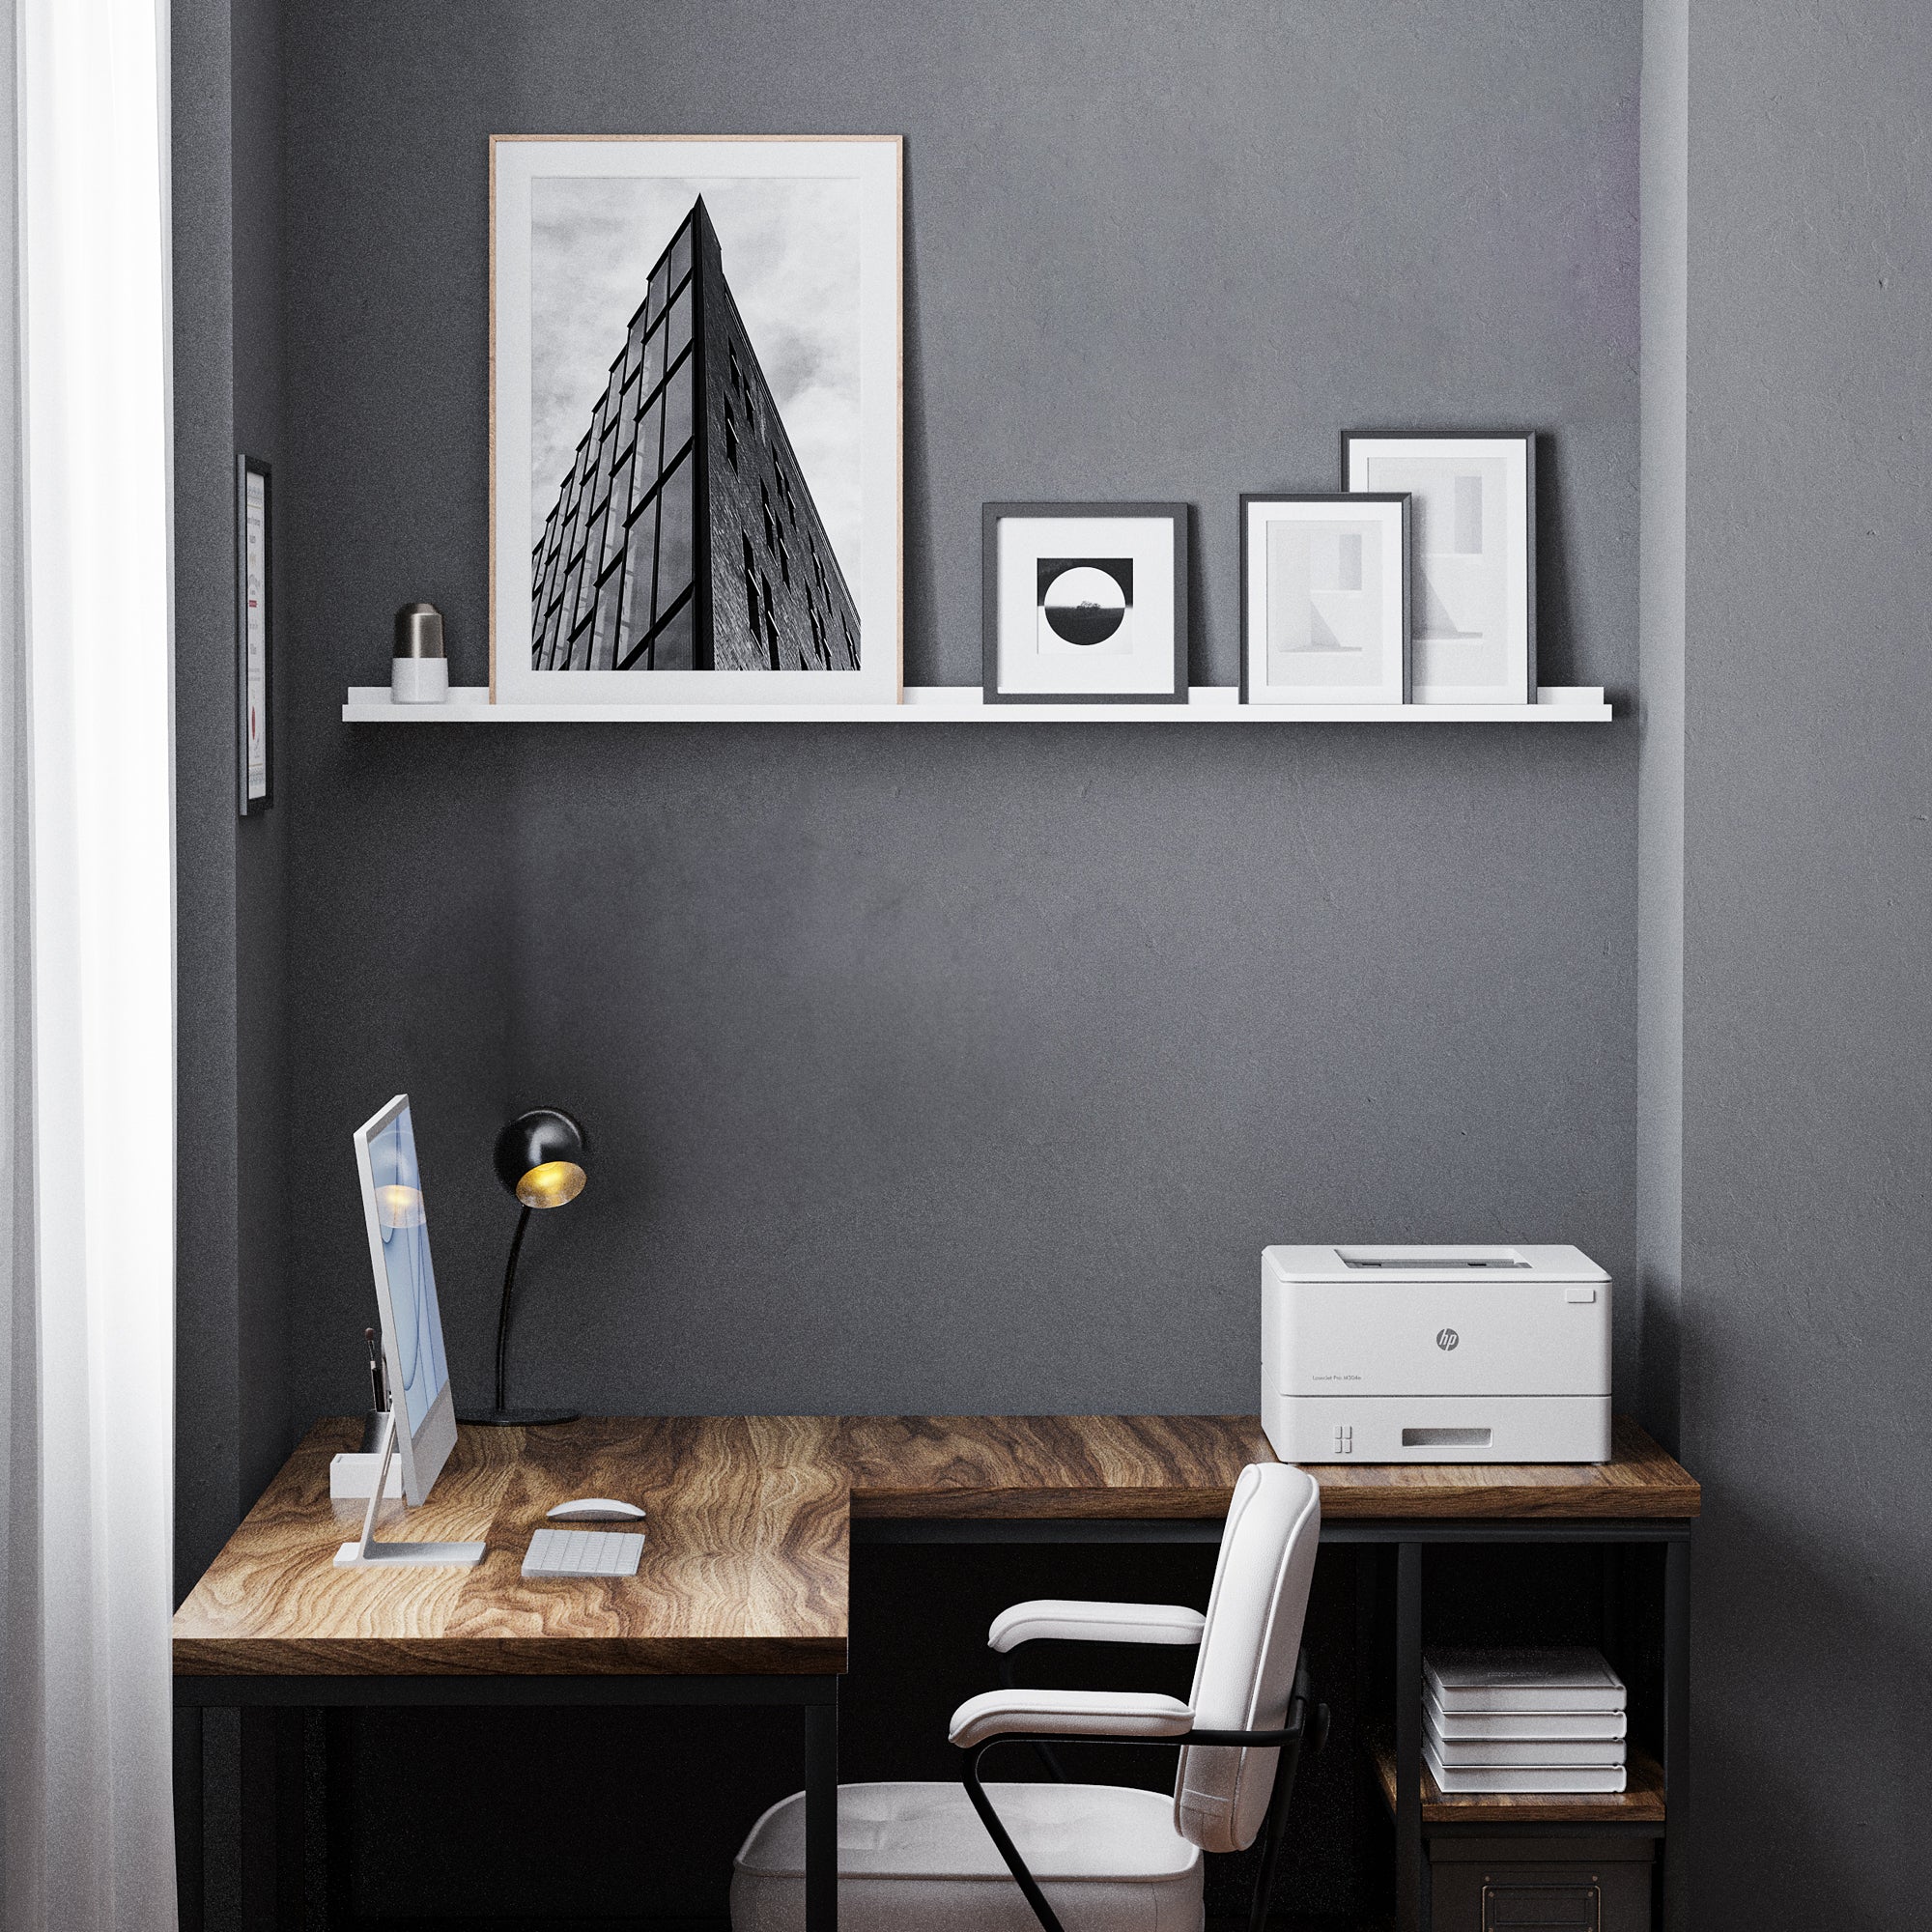 A minimalist home office with a wooden desk and chair, and a white shelf for wall displaying monochrome art above it.